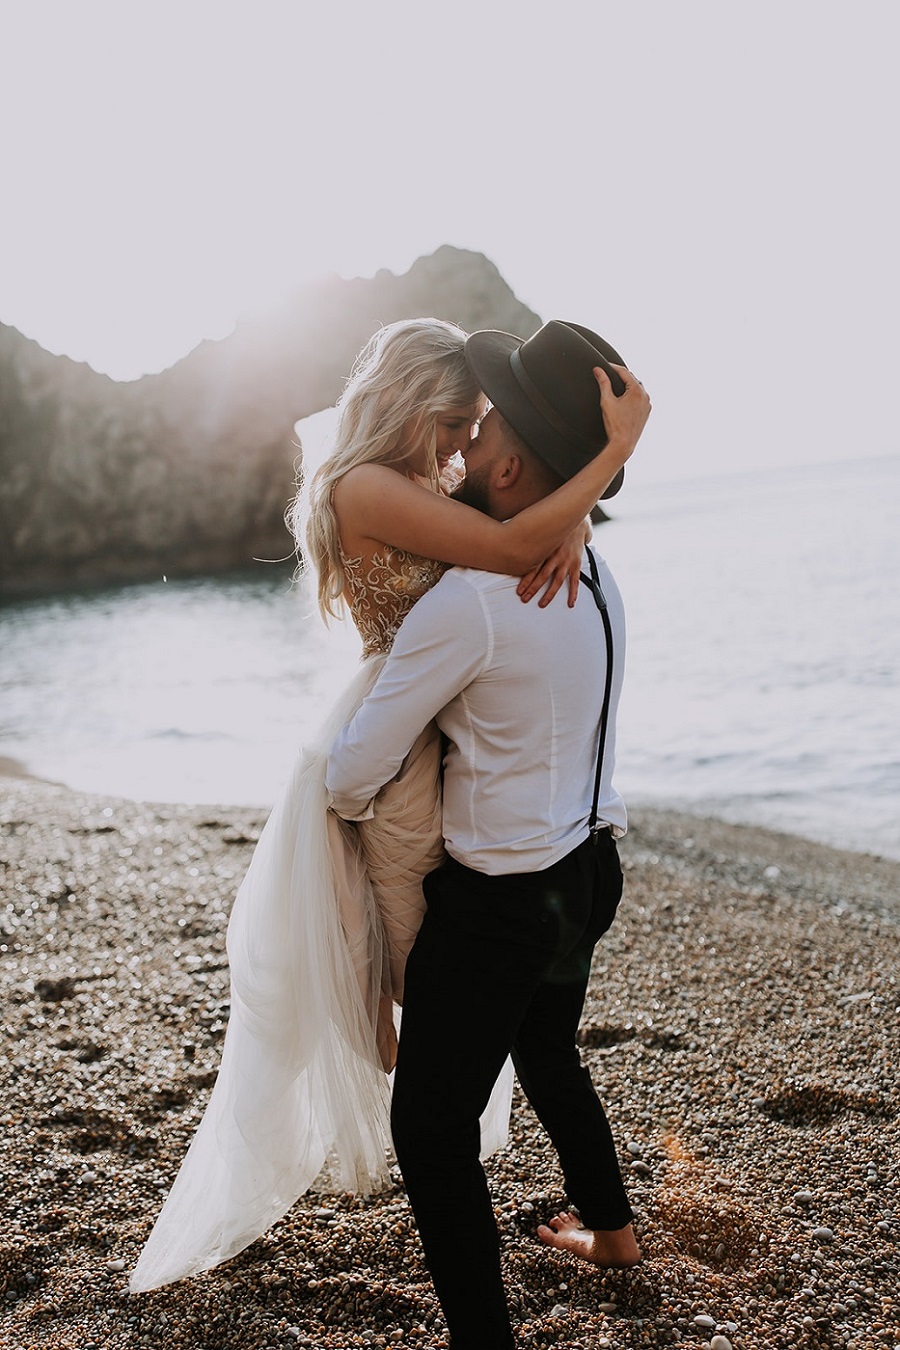 Sunrise elopement shoot! Westlake Photography and the Rustic Dresser (29)